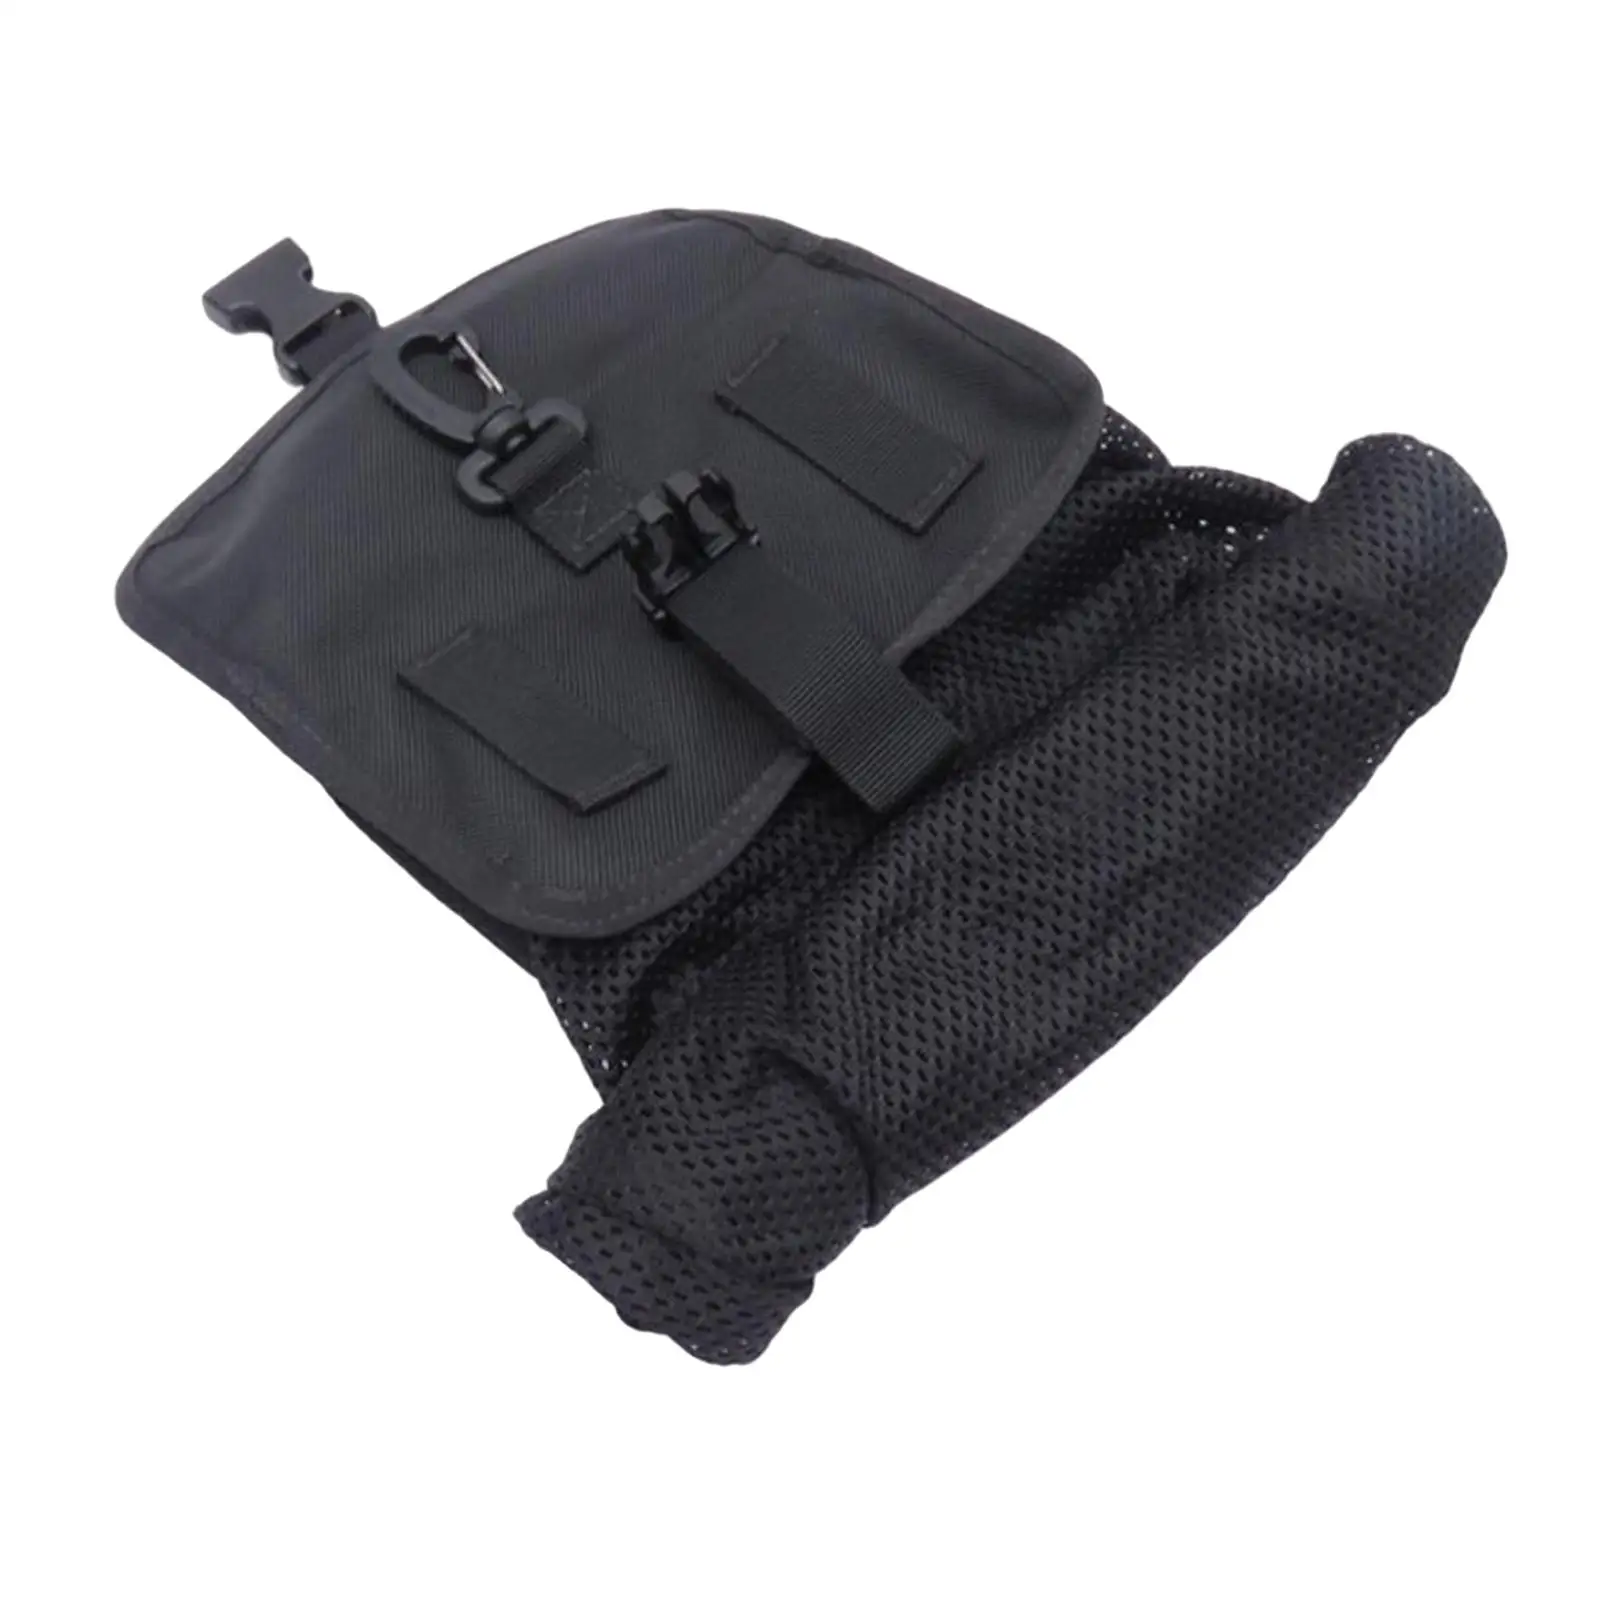 Portable Gear Bag Storage Holder Pocket Scuba Diving Mesh Pouch for Flippers